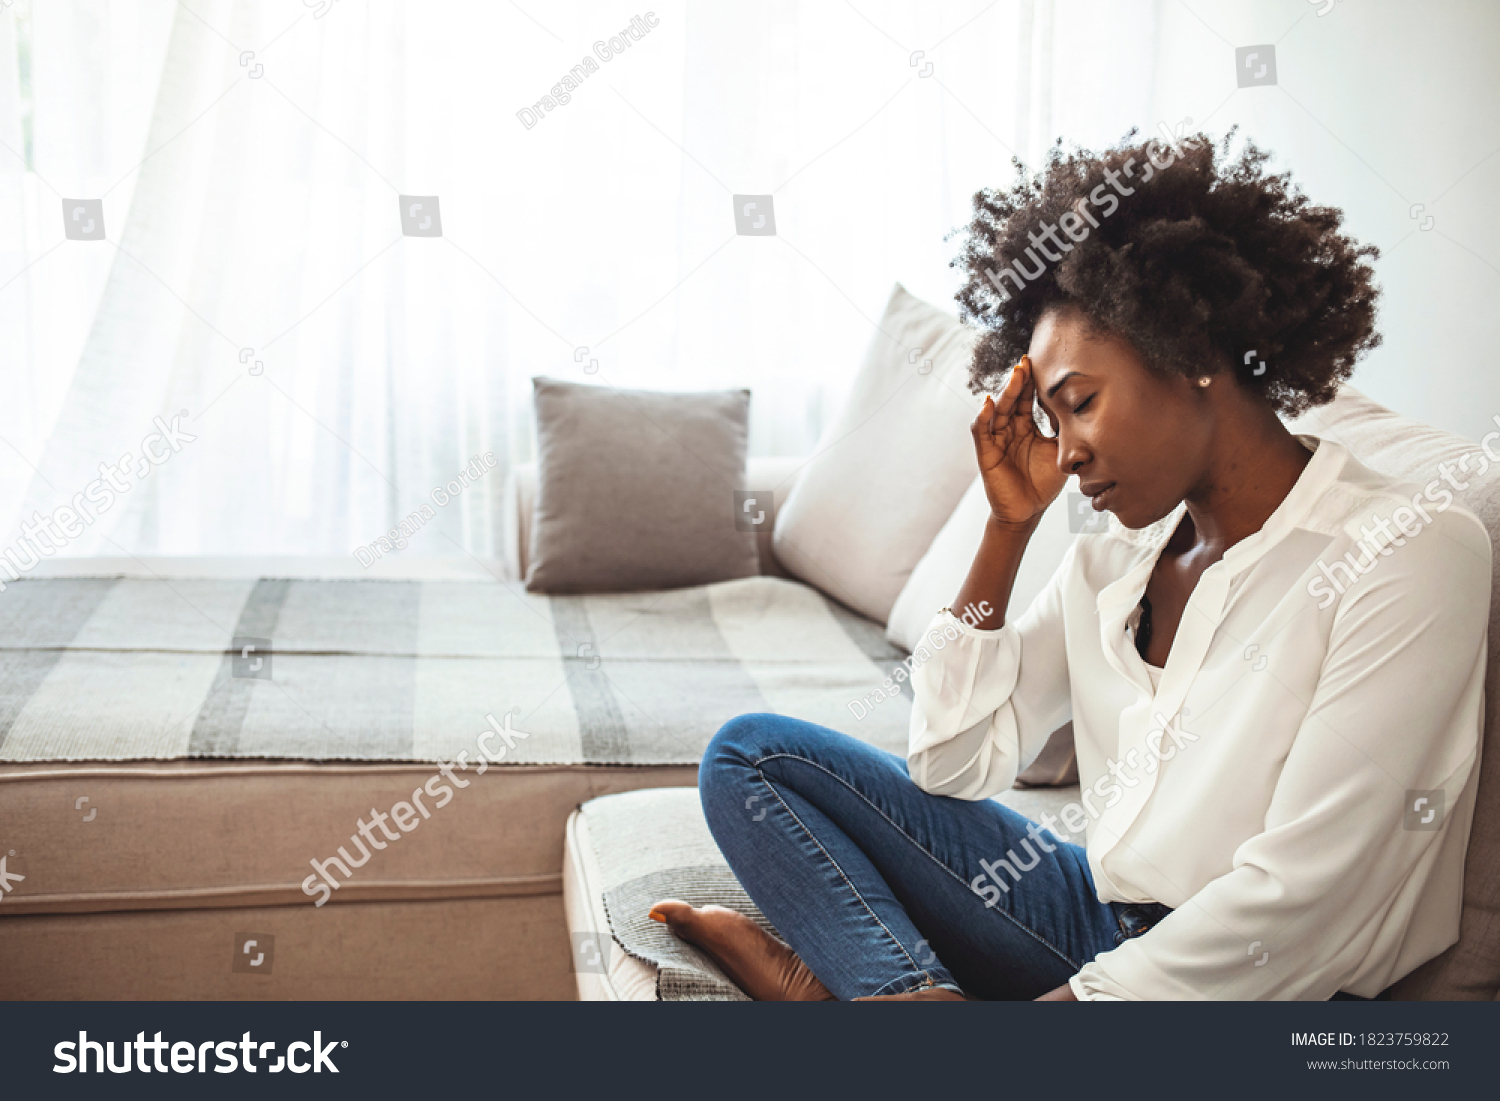 Close up african female sit on couch feels unhappy desperate thinking about personal difficulties mental health problems, 30s sad woman need psychological support goes through divorce break up concept #1823759822